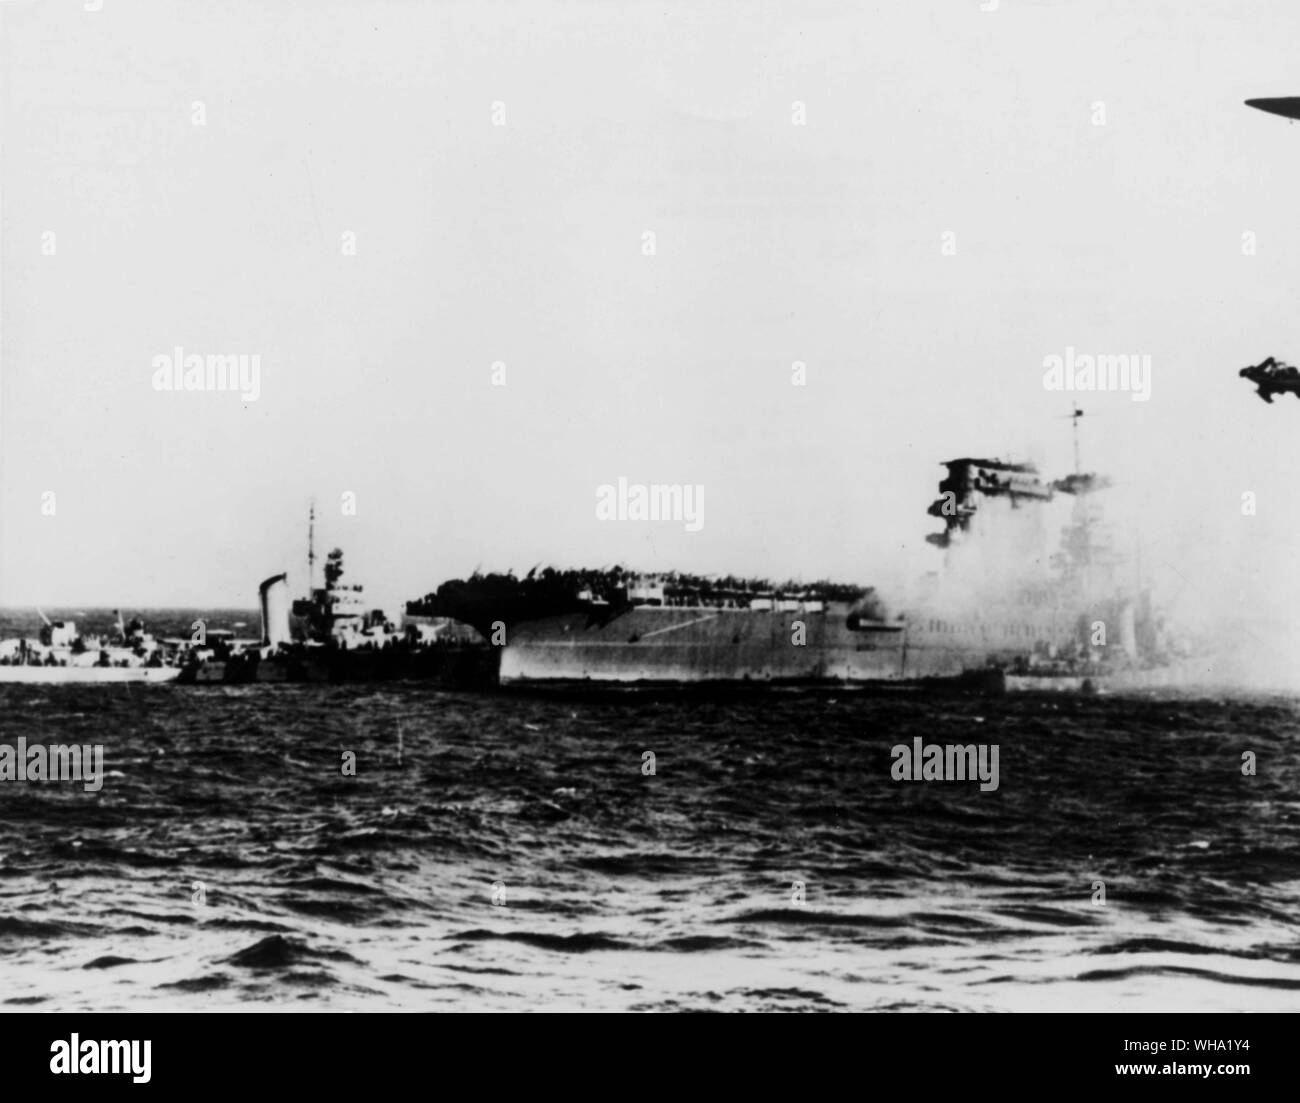 WW2: Pacific Ocean. Destroyers remove crewmen of the aircraft carrier USS Lexington (CV-2) following the battle of the Coral Sea. The attempt is being made to pump water from the destroyer along the starboard side to the fires on the carrier. Stock Photo